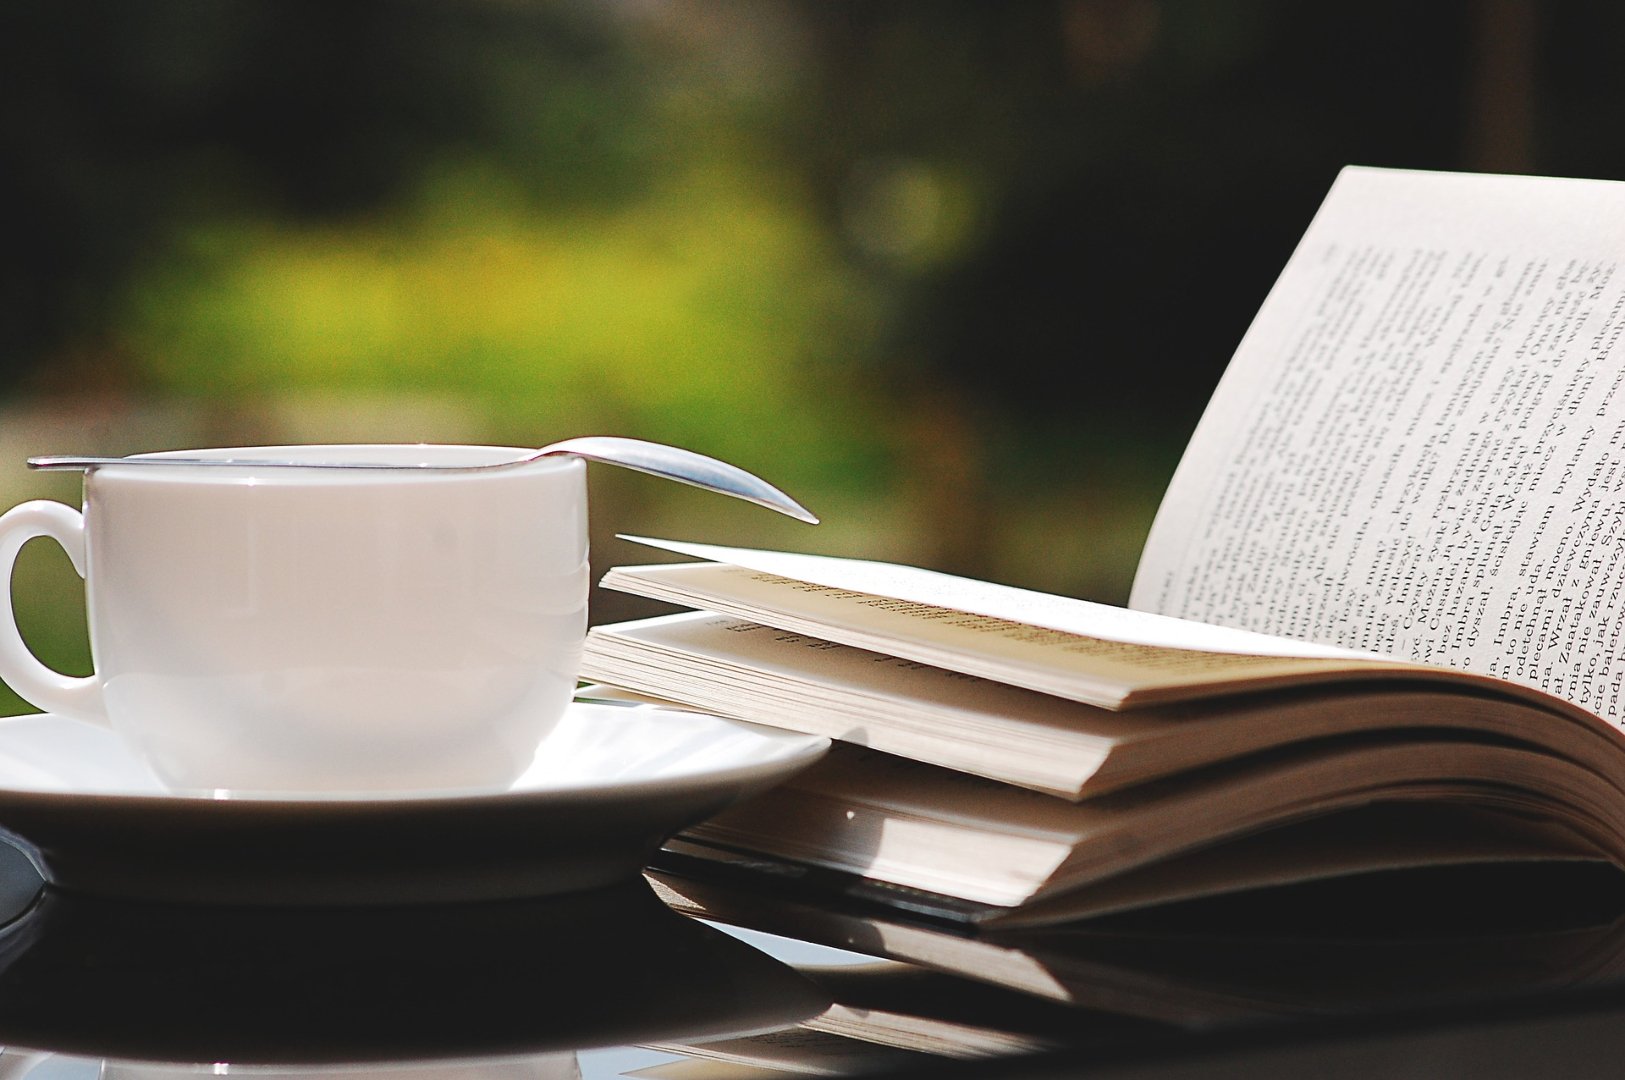 teacup with spoon on top next to open book